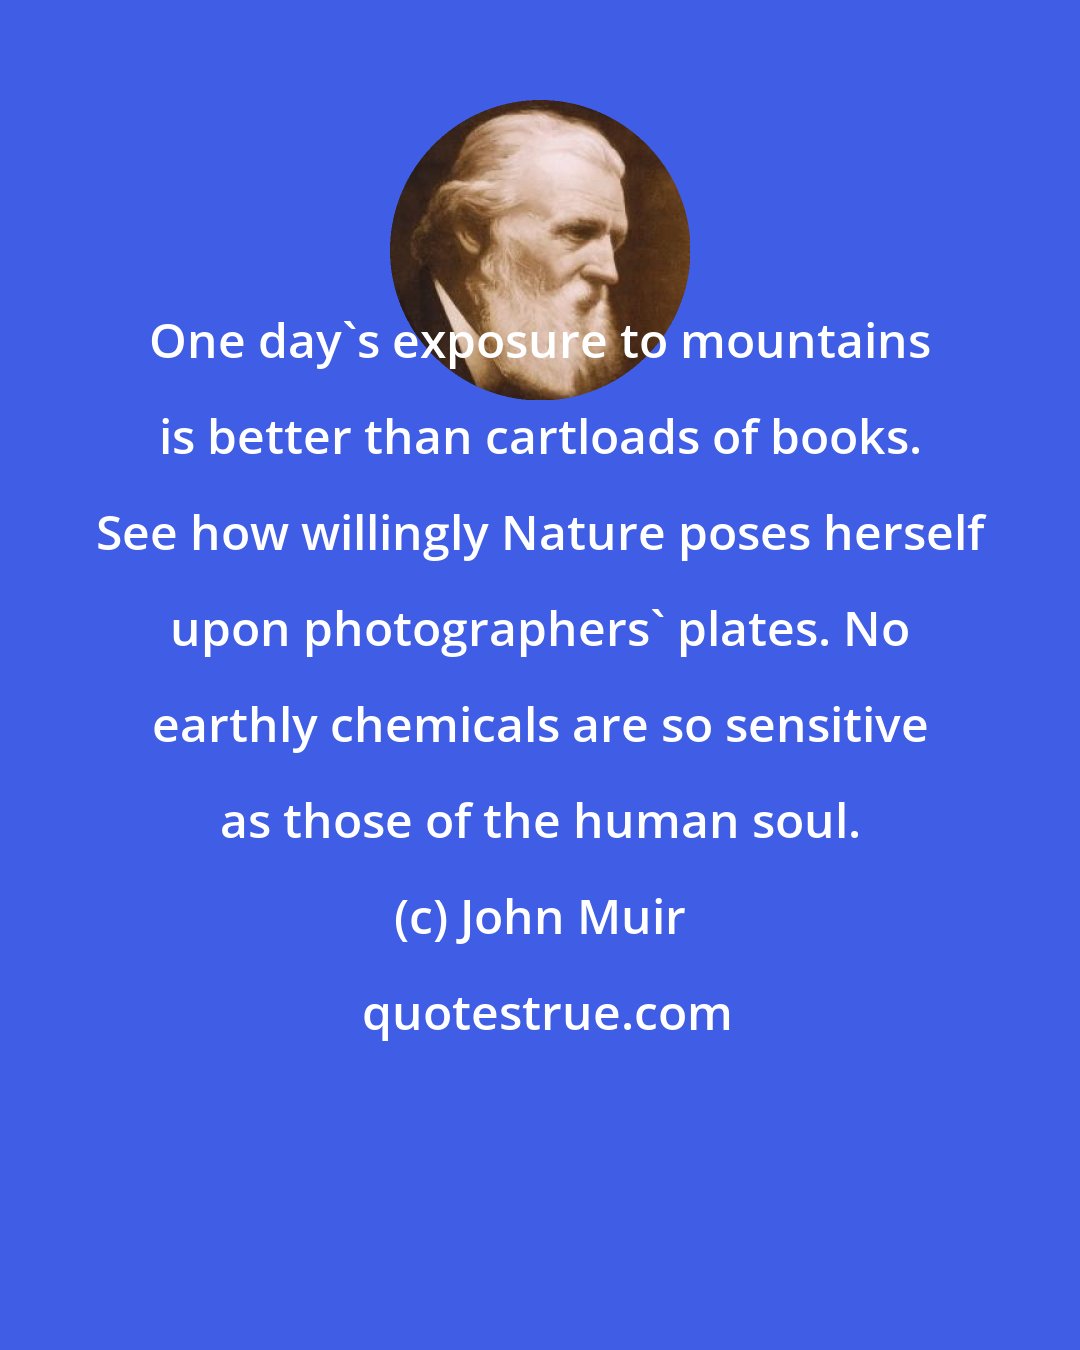 John Muir: One day's exposure to mountains is better than cartloads of books. See how willingly Nature poses herself upon photographers' plates. No earthly chemicals are so sensitive as those of the human soul.